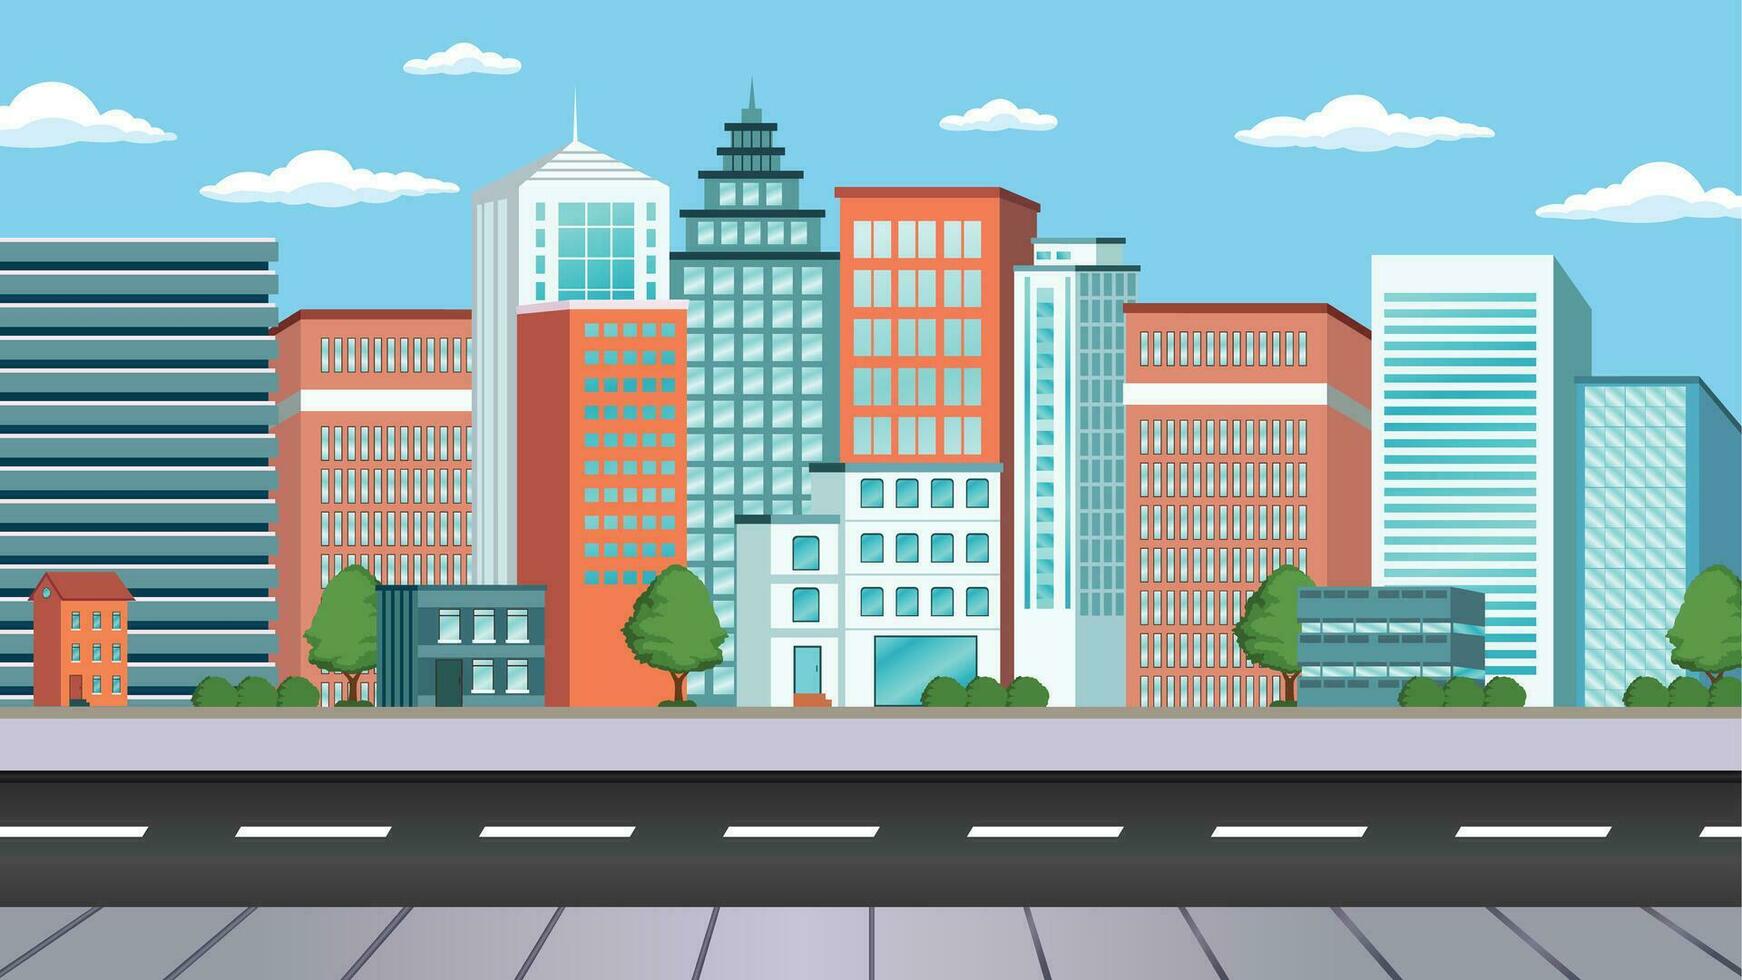 A city landscape vector illustration buildings and road designed with full colors